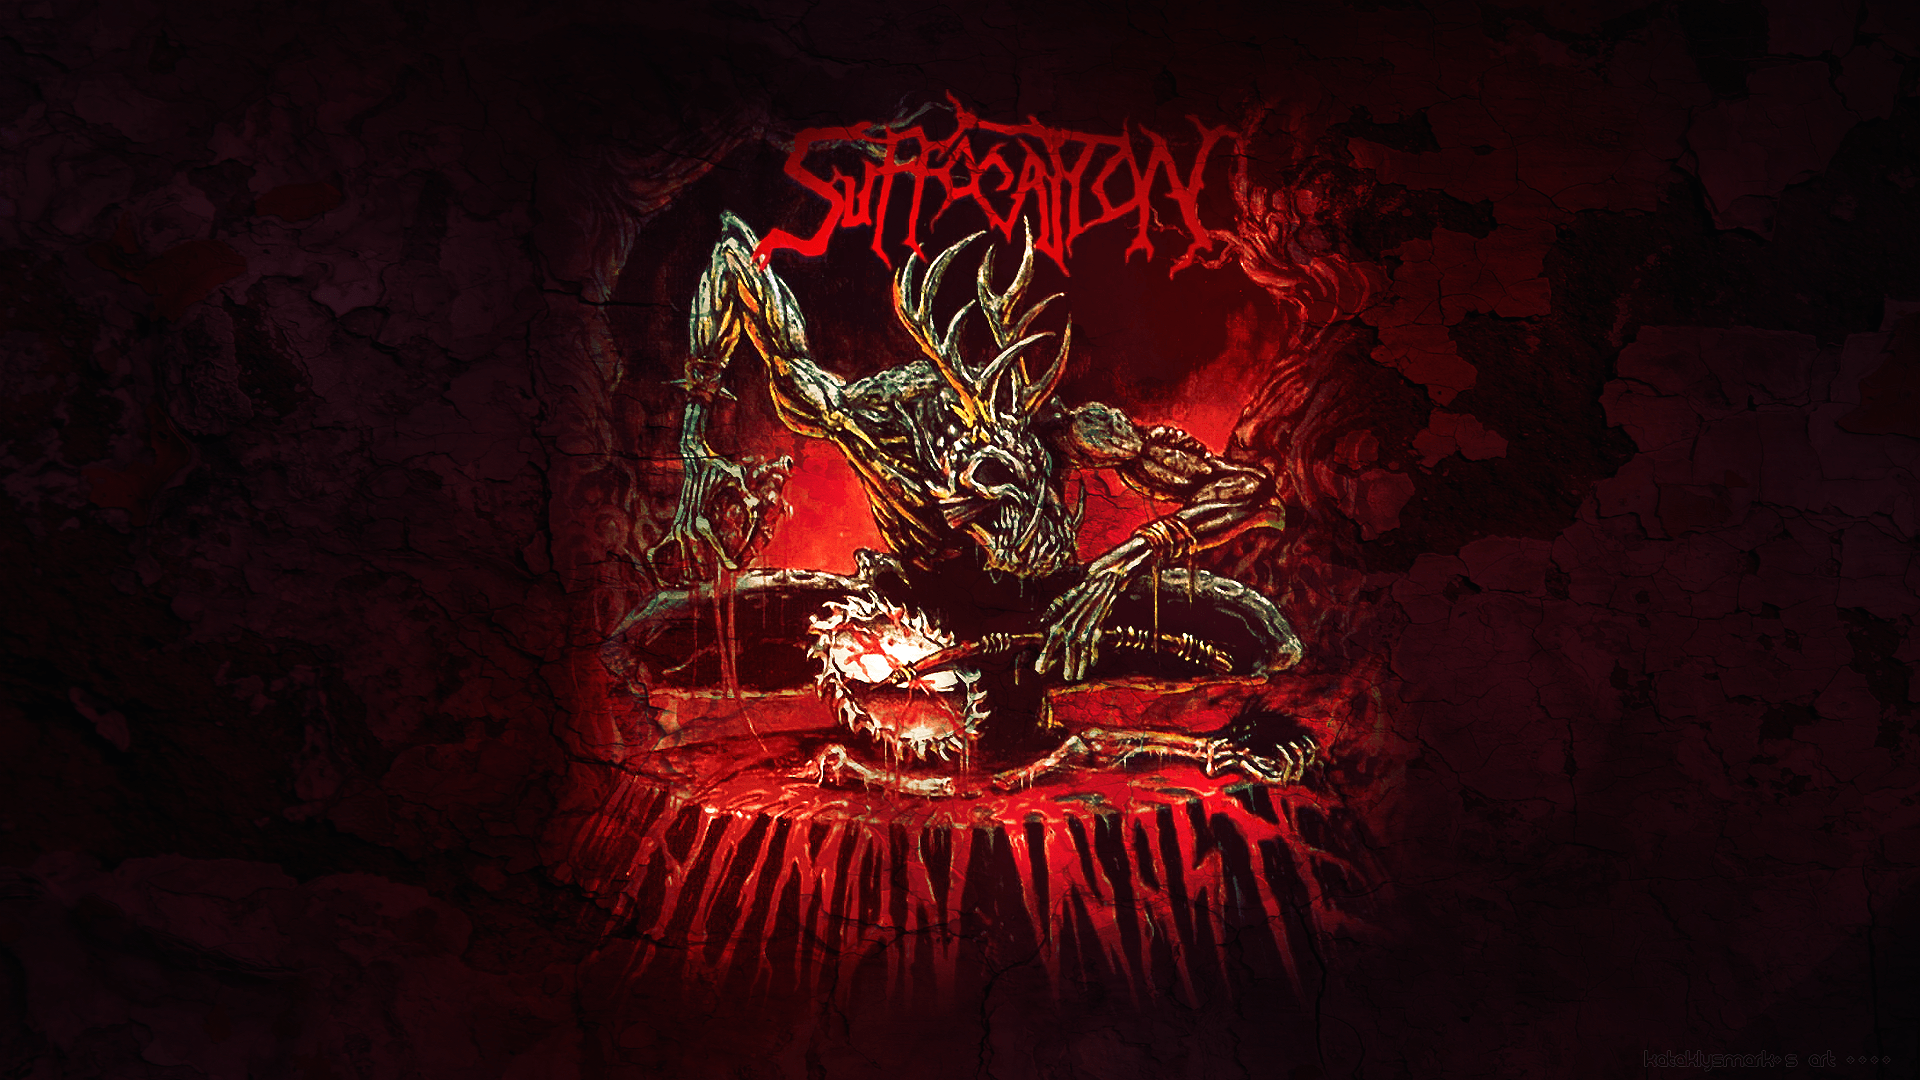 Suffocation Wallpapers